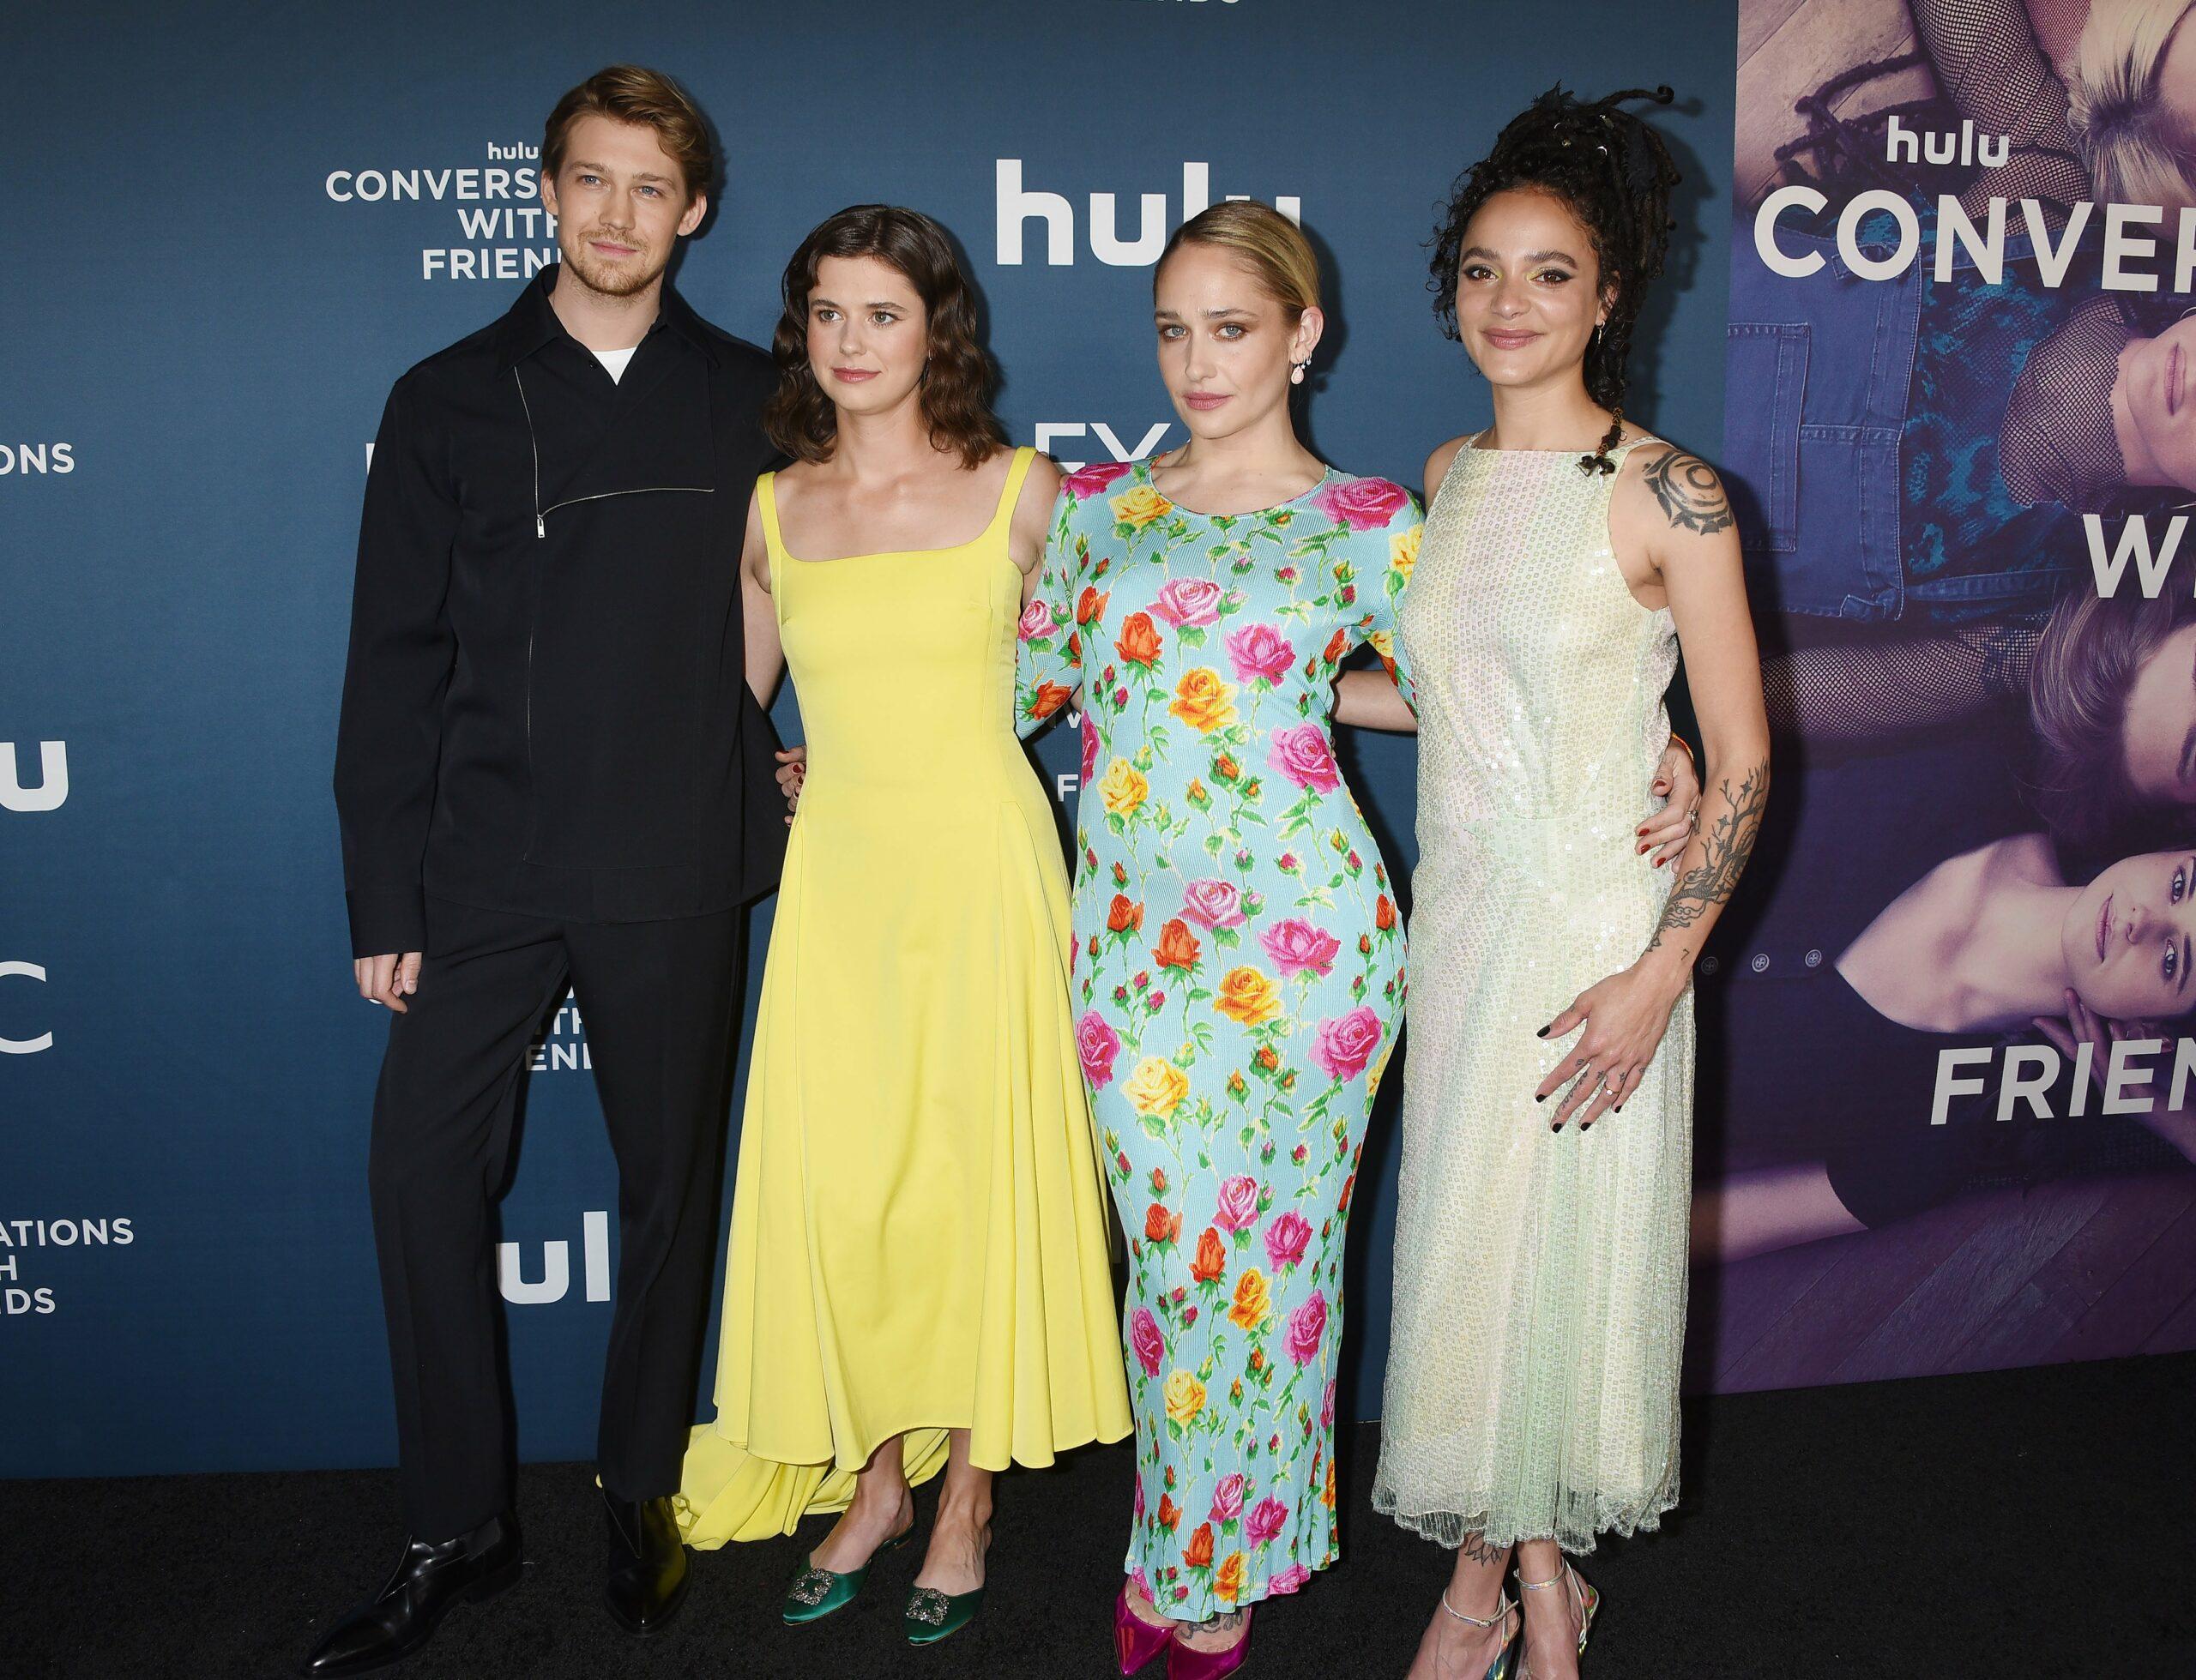 Hulu's Conversations With Friends FYC Event